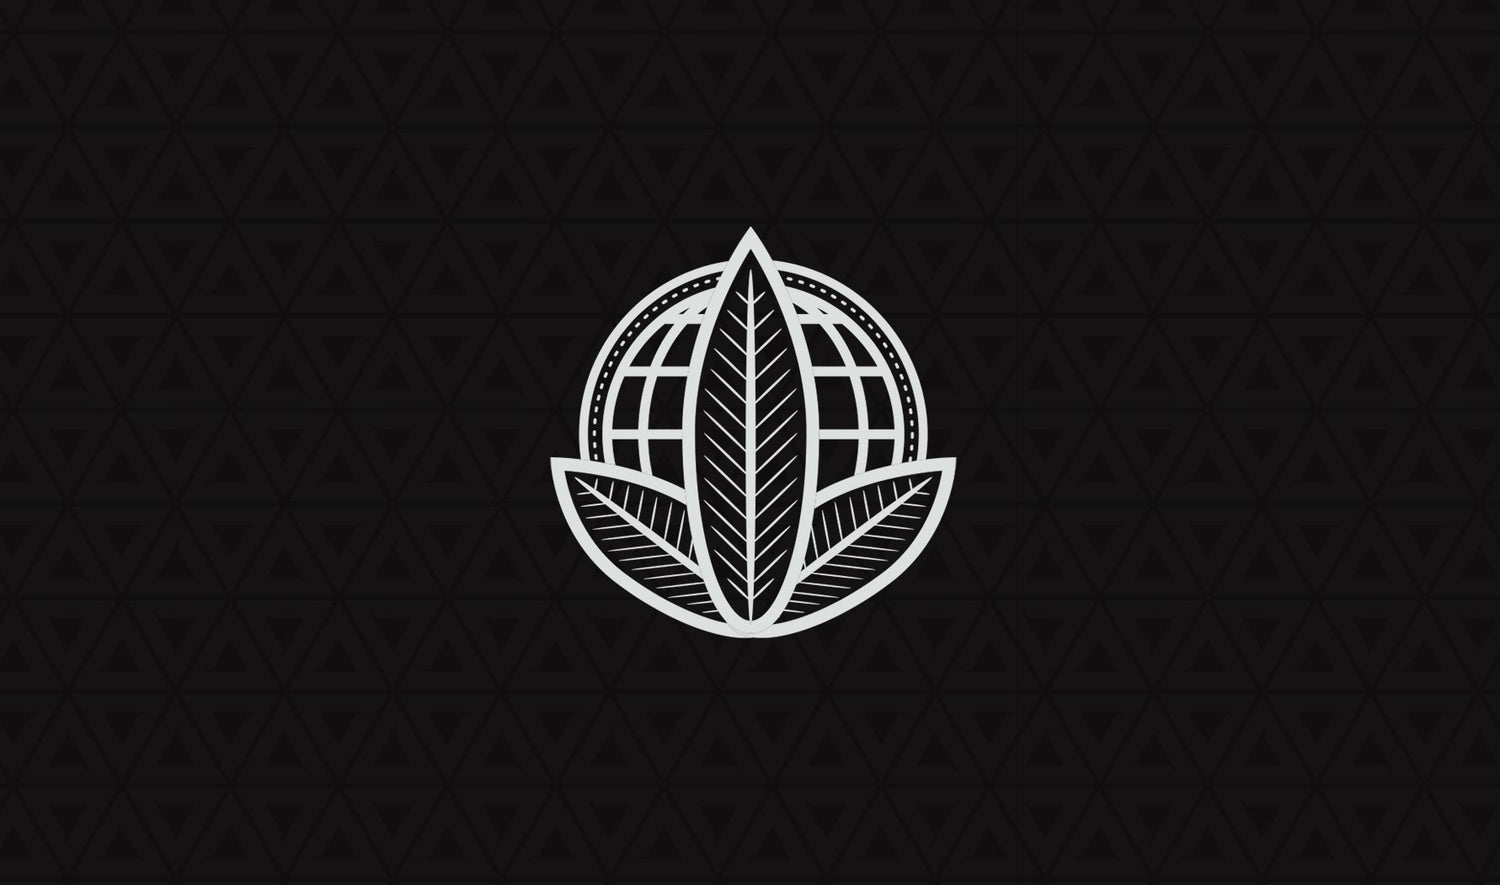 SLANG Worldwide and Gage Cannabis Co. Partner to Bring Leading Portfolio of Cannabis Products to Michigan